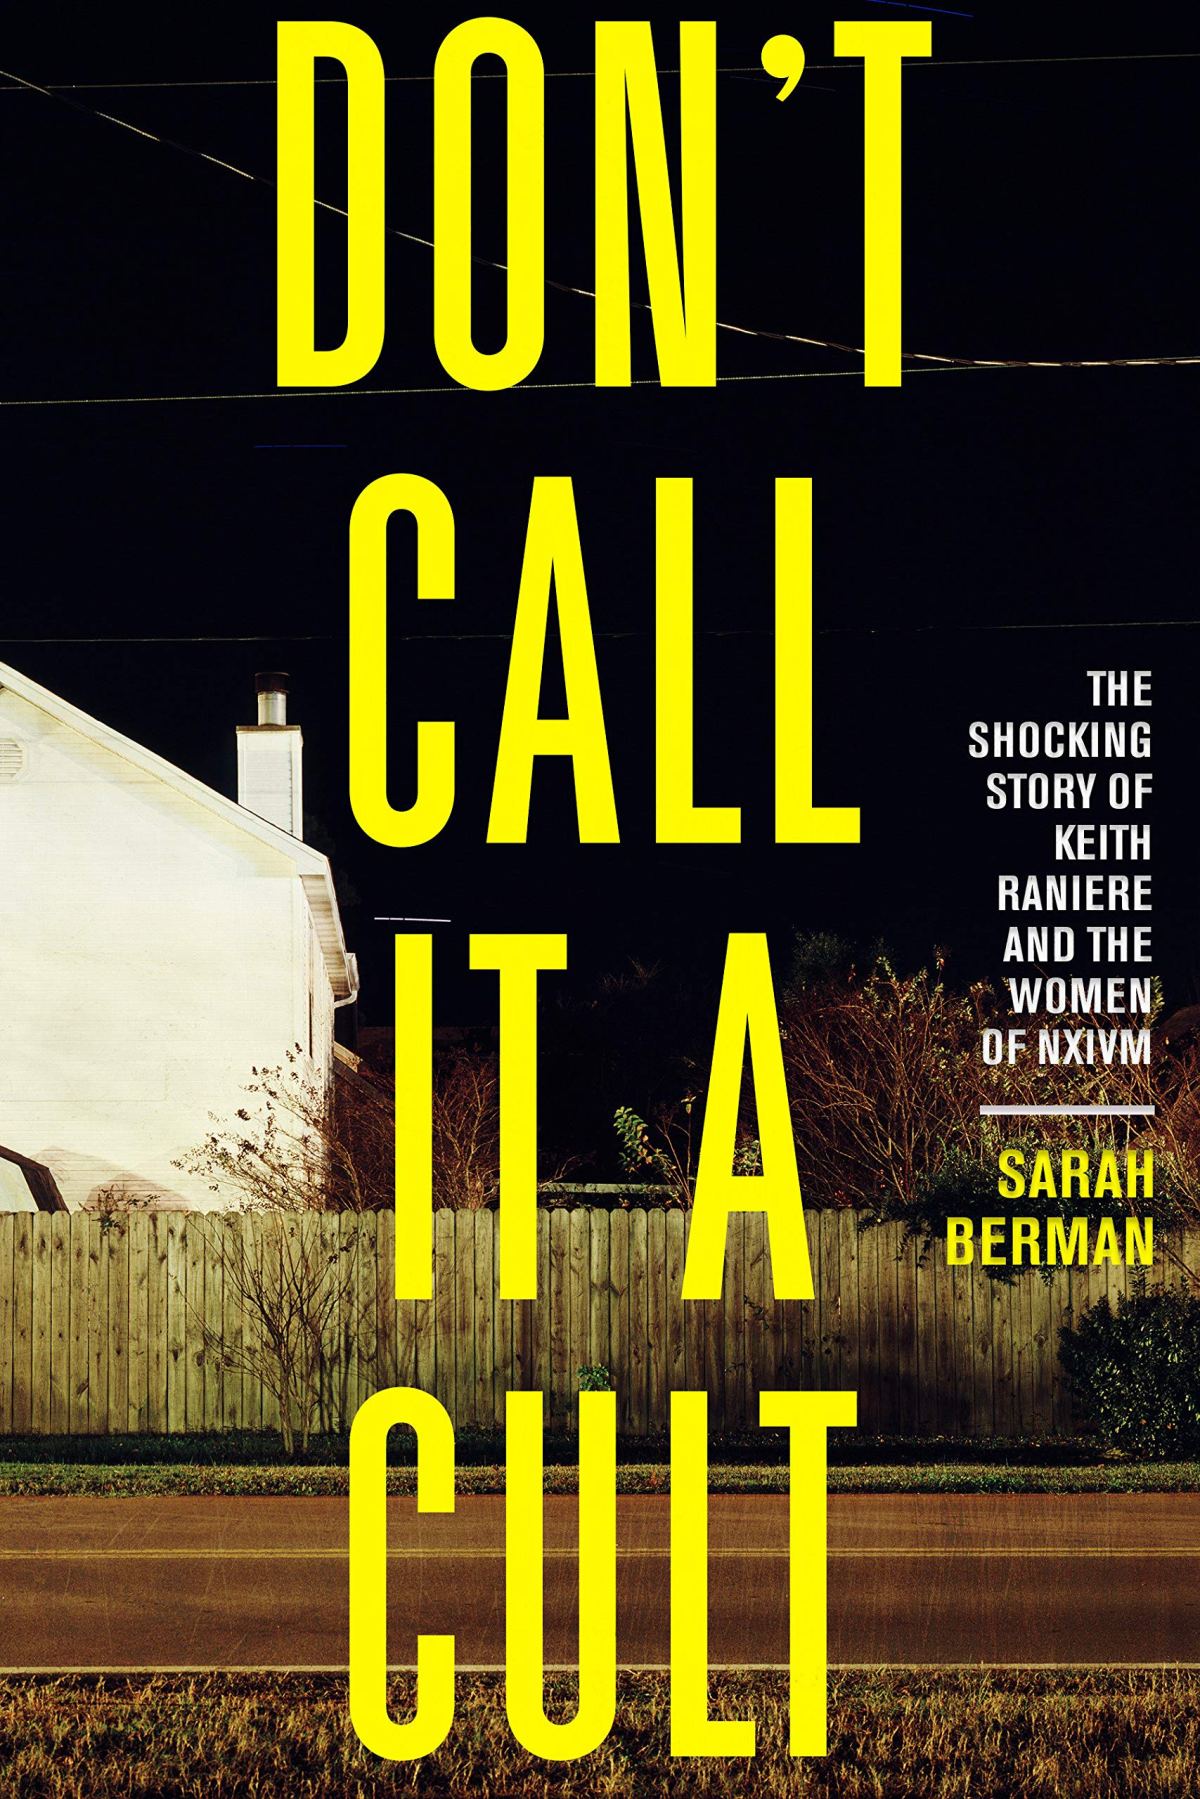 Book 124 – Don’t Call it a Cult by Sarah Berman